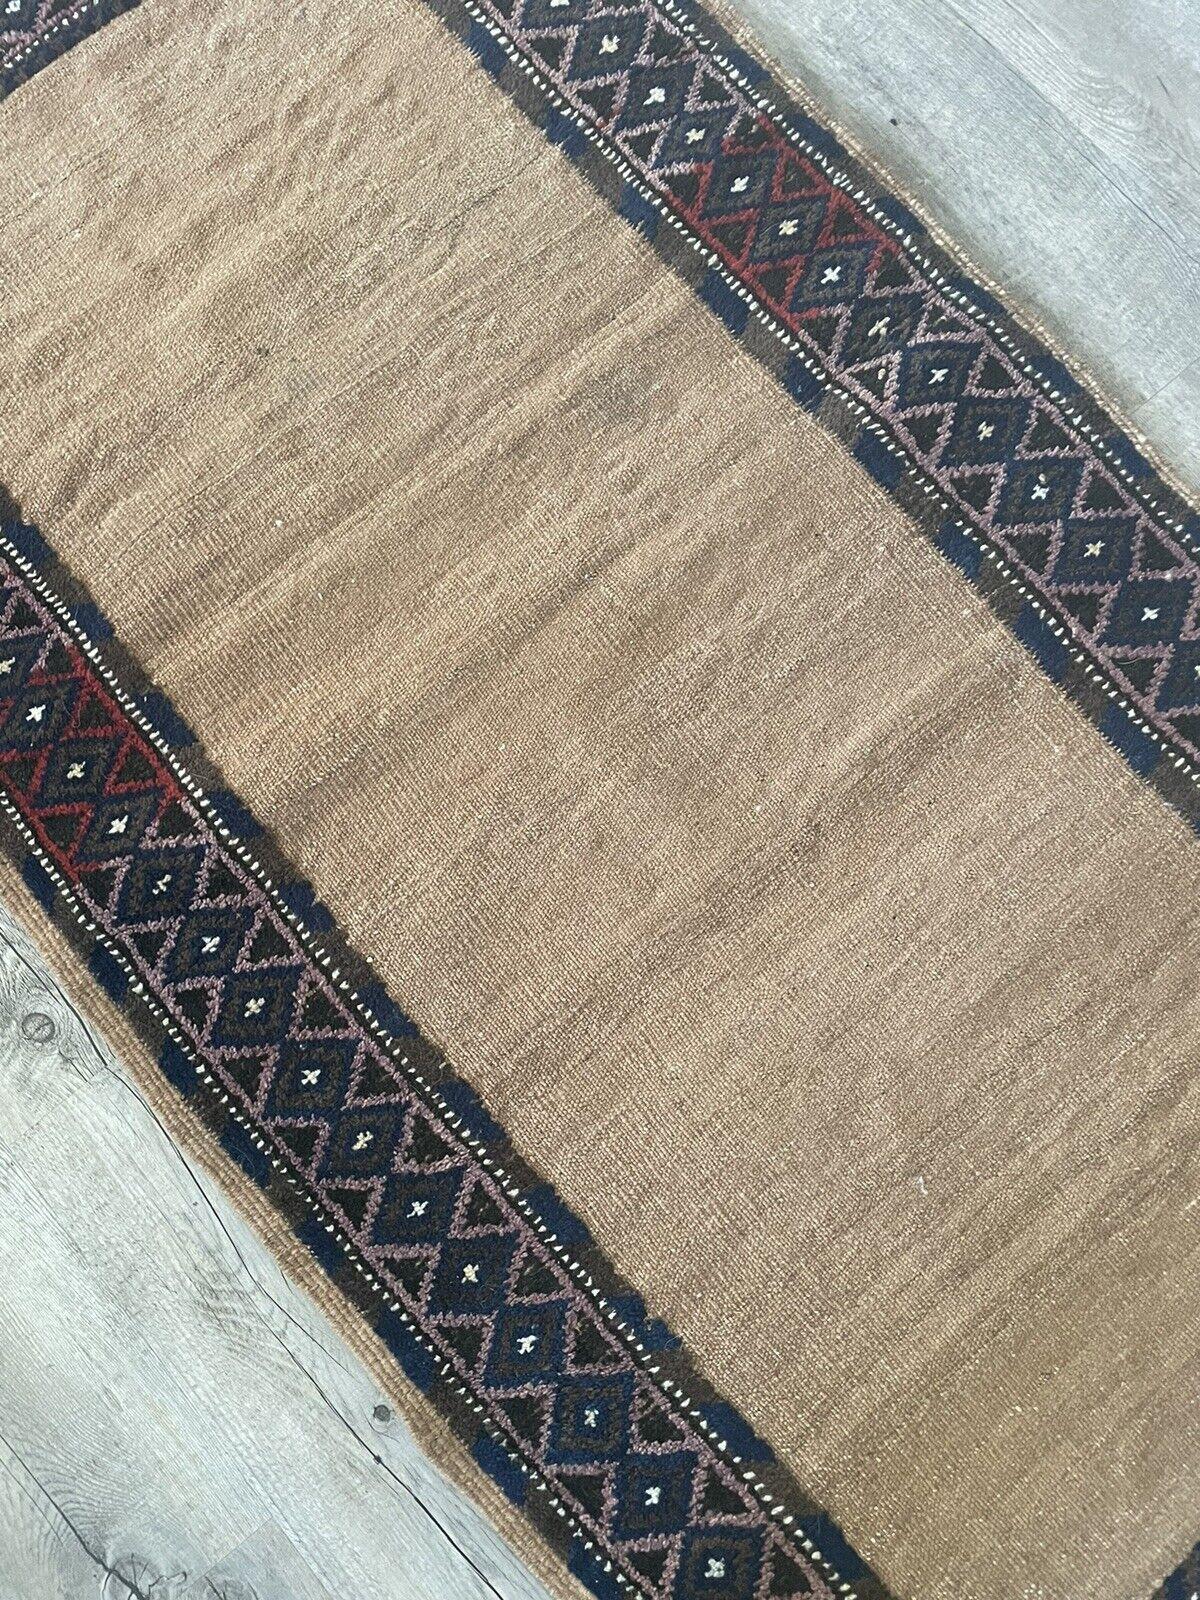 Handmade Antique Afghan Baluch Collectible Rug 2.3' x 5', 1920s - 1N12 For Sale 8